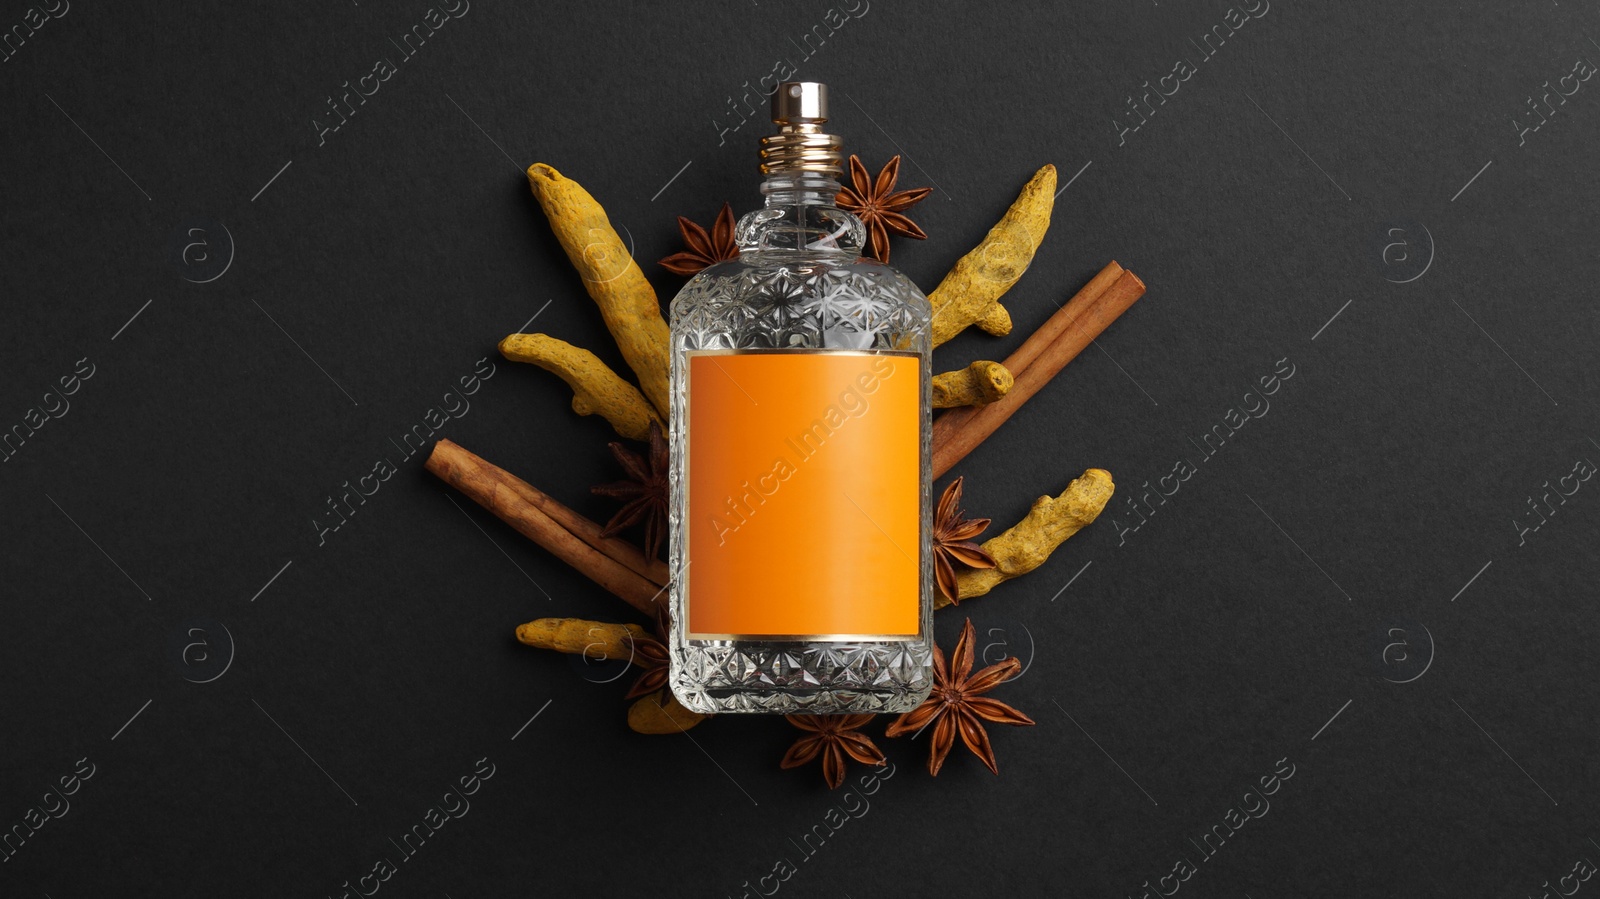 Photo of Bottle of perfume surrounded by different spices on dark background, top view